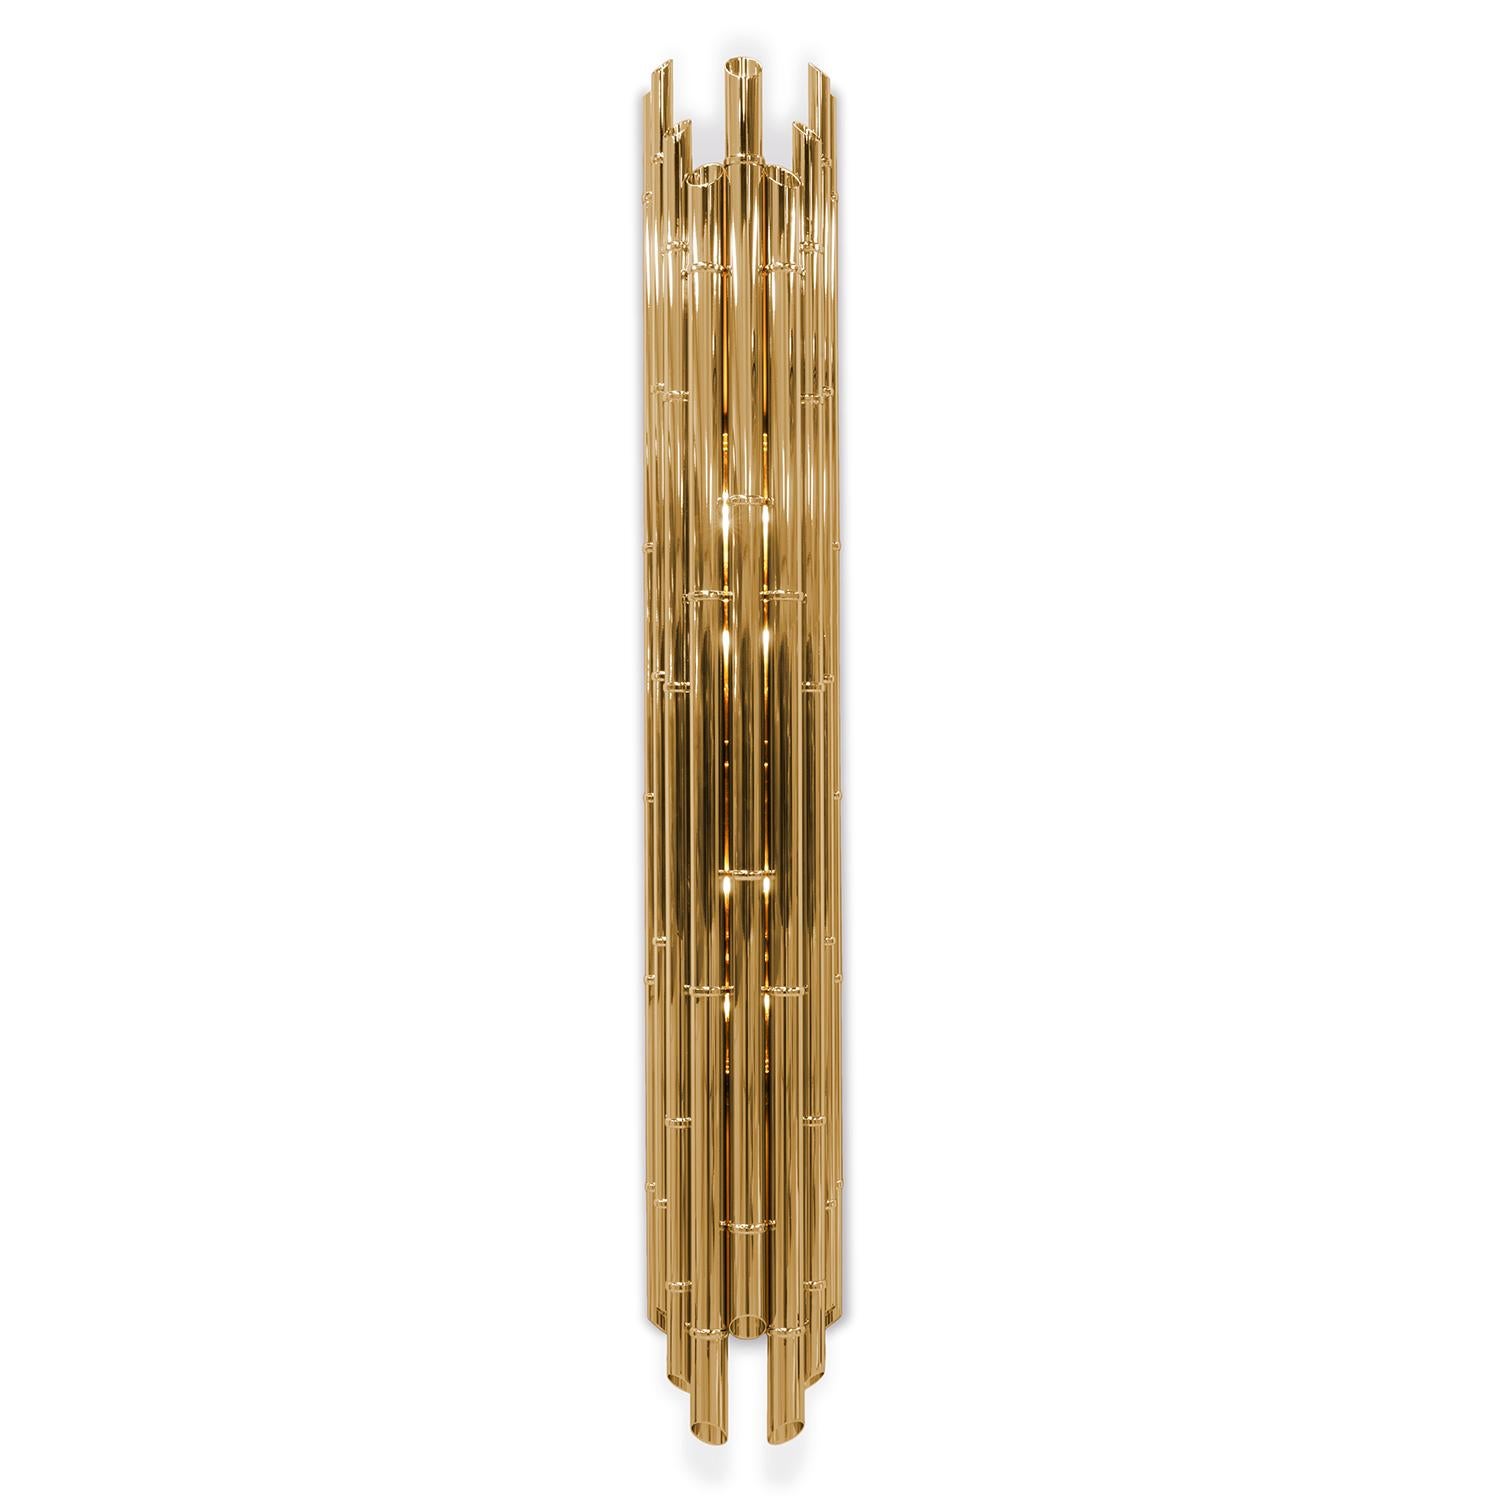 Wall lamp bamboo XL with all structure 
in solid brass in polished finish.
Also available in Bamboo medium size, on request.